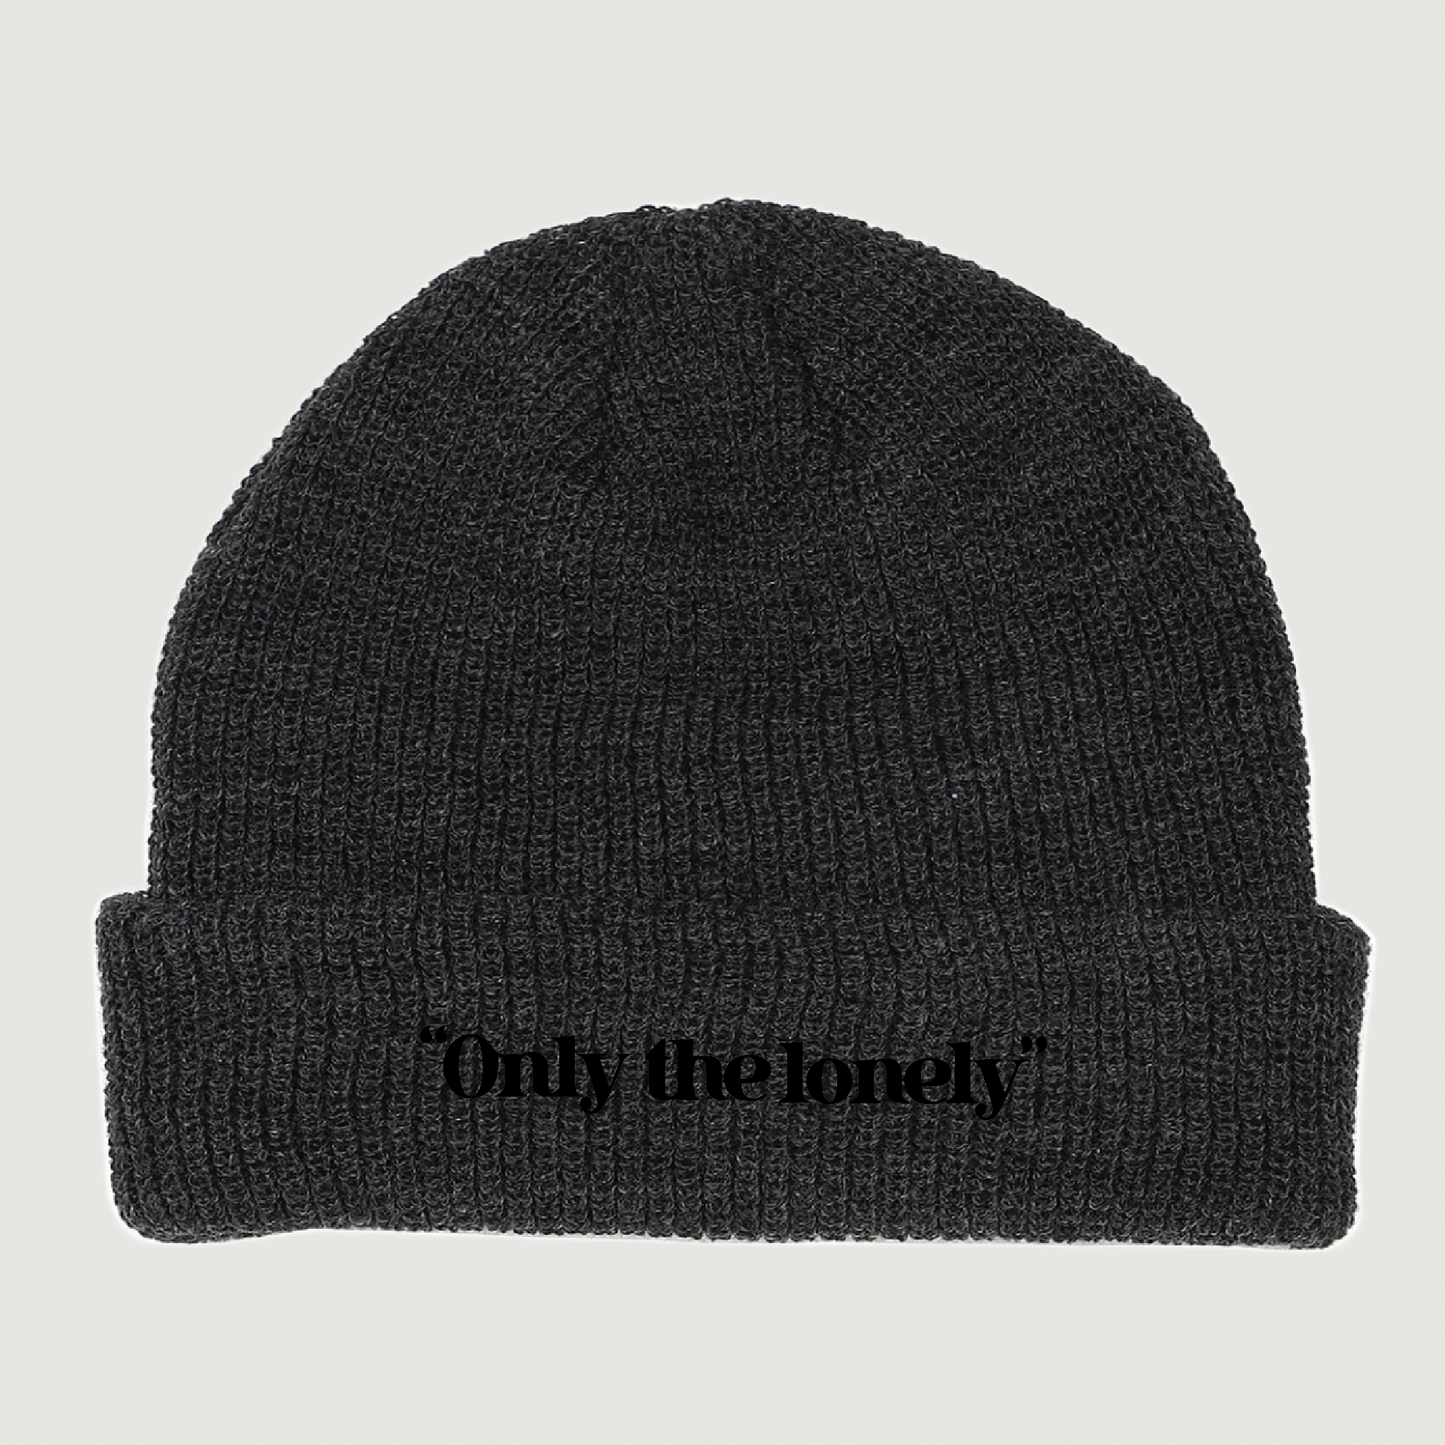 ONLY THE LONELY FISHERMAN BEANIE (GREY/BLACK)